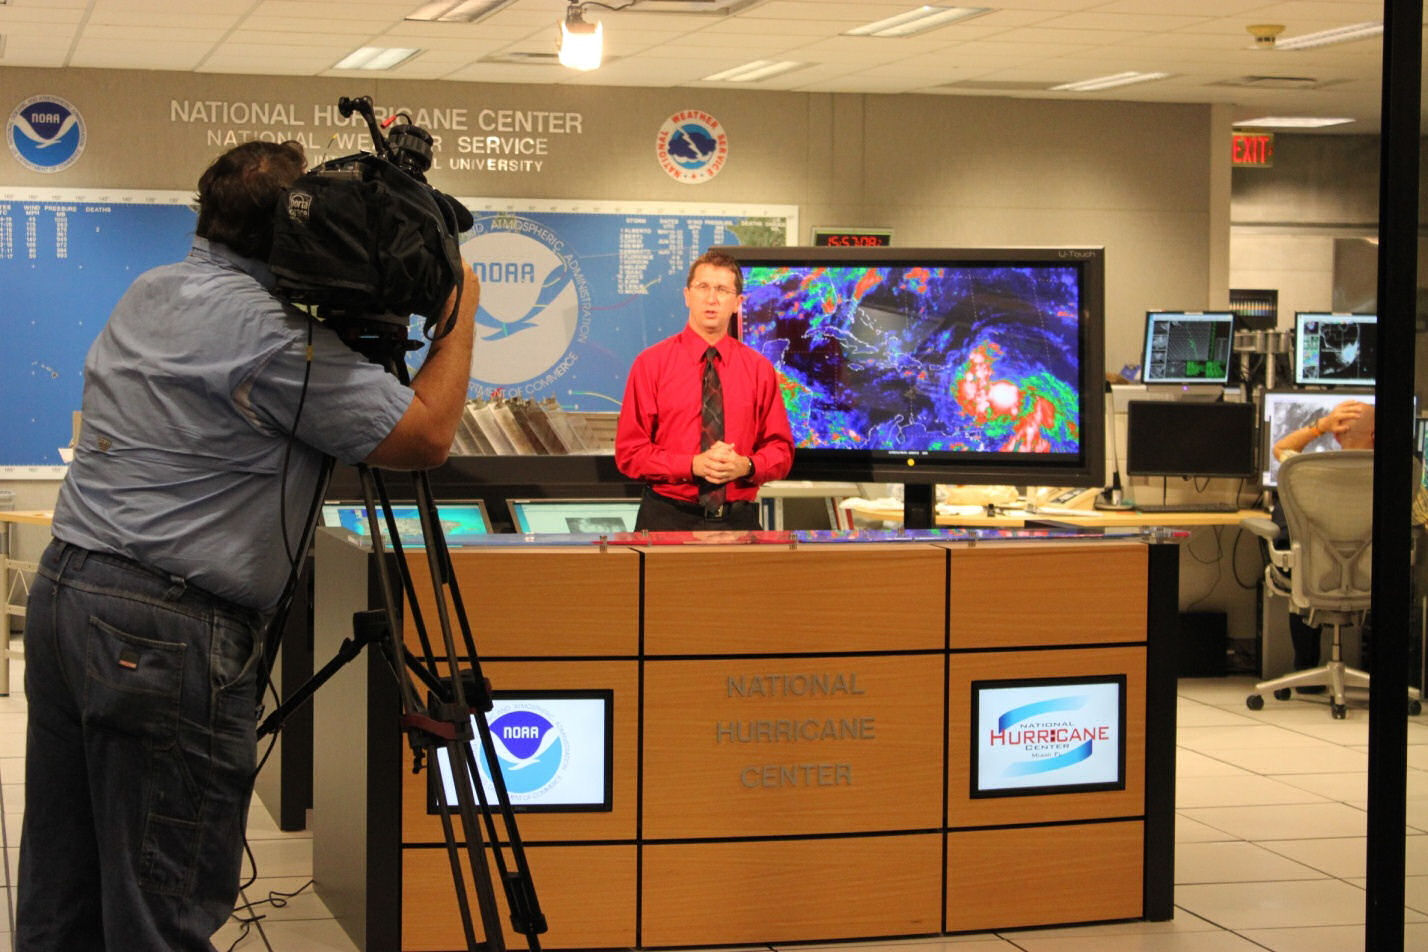 National Hurricane Center Director Dr. Rick Knabb provides a television update on “Isaac” as the storm threatens the Caribbean and the U.S.